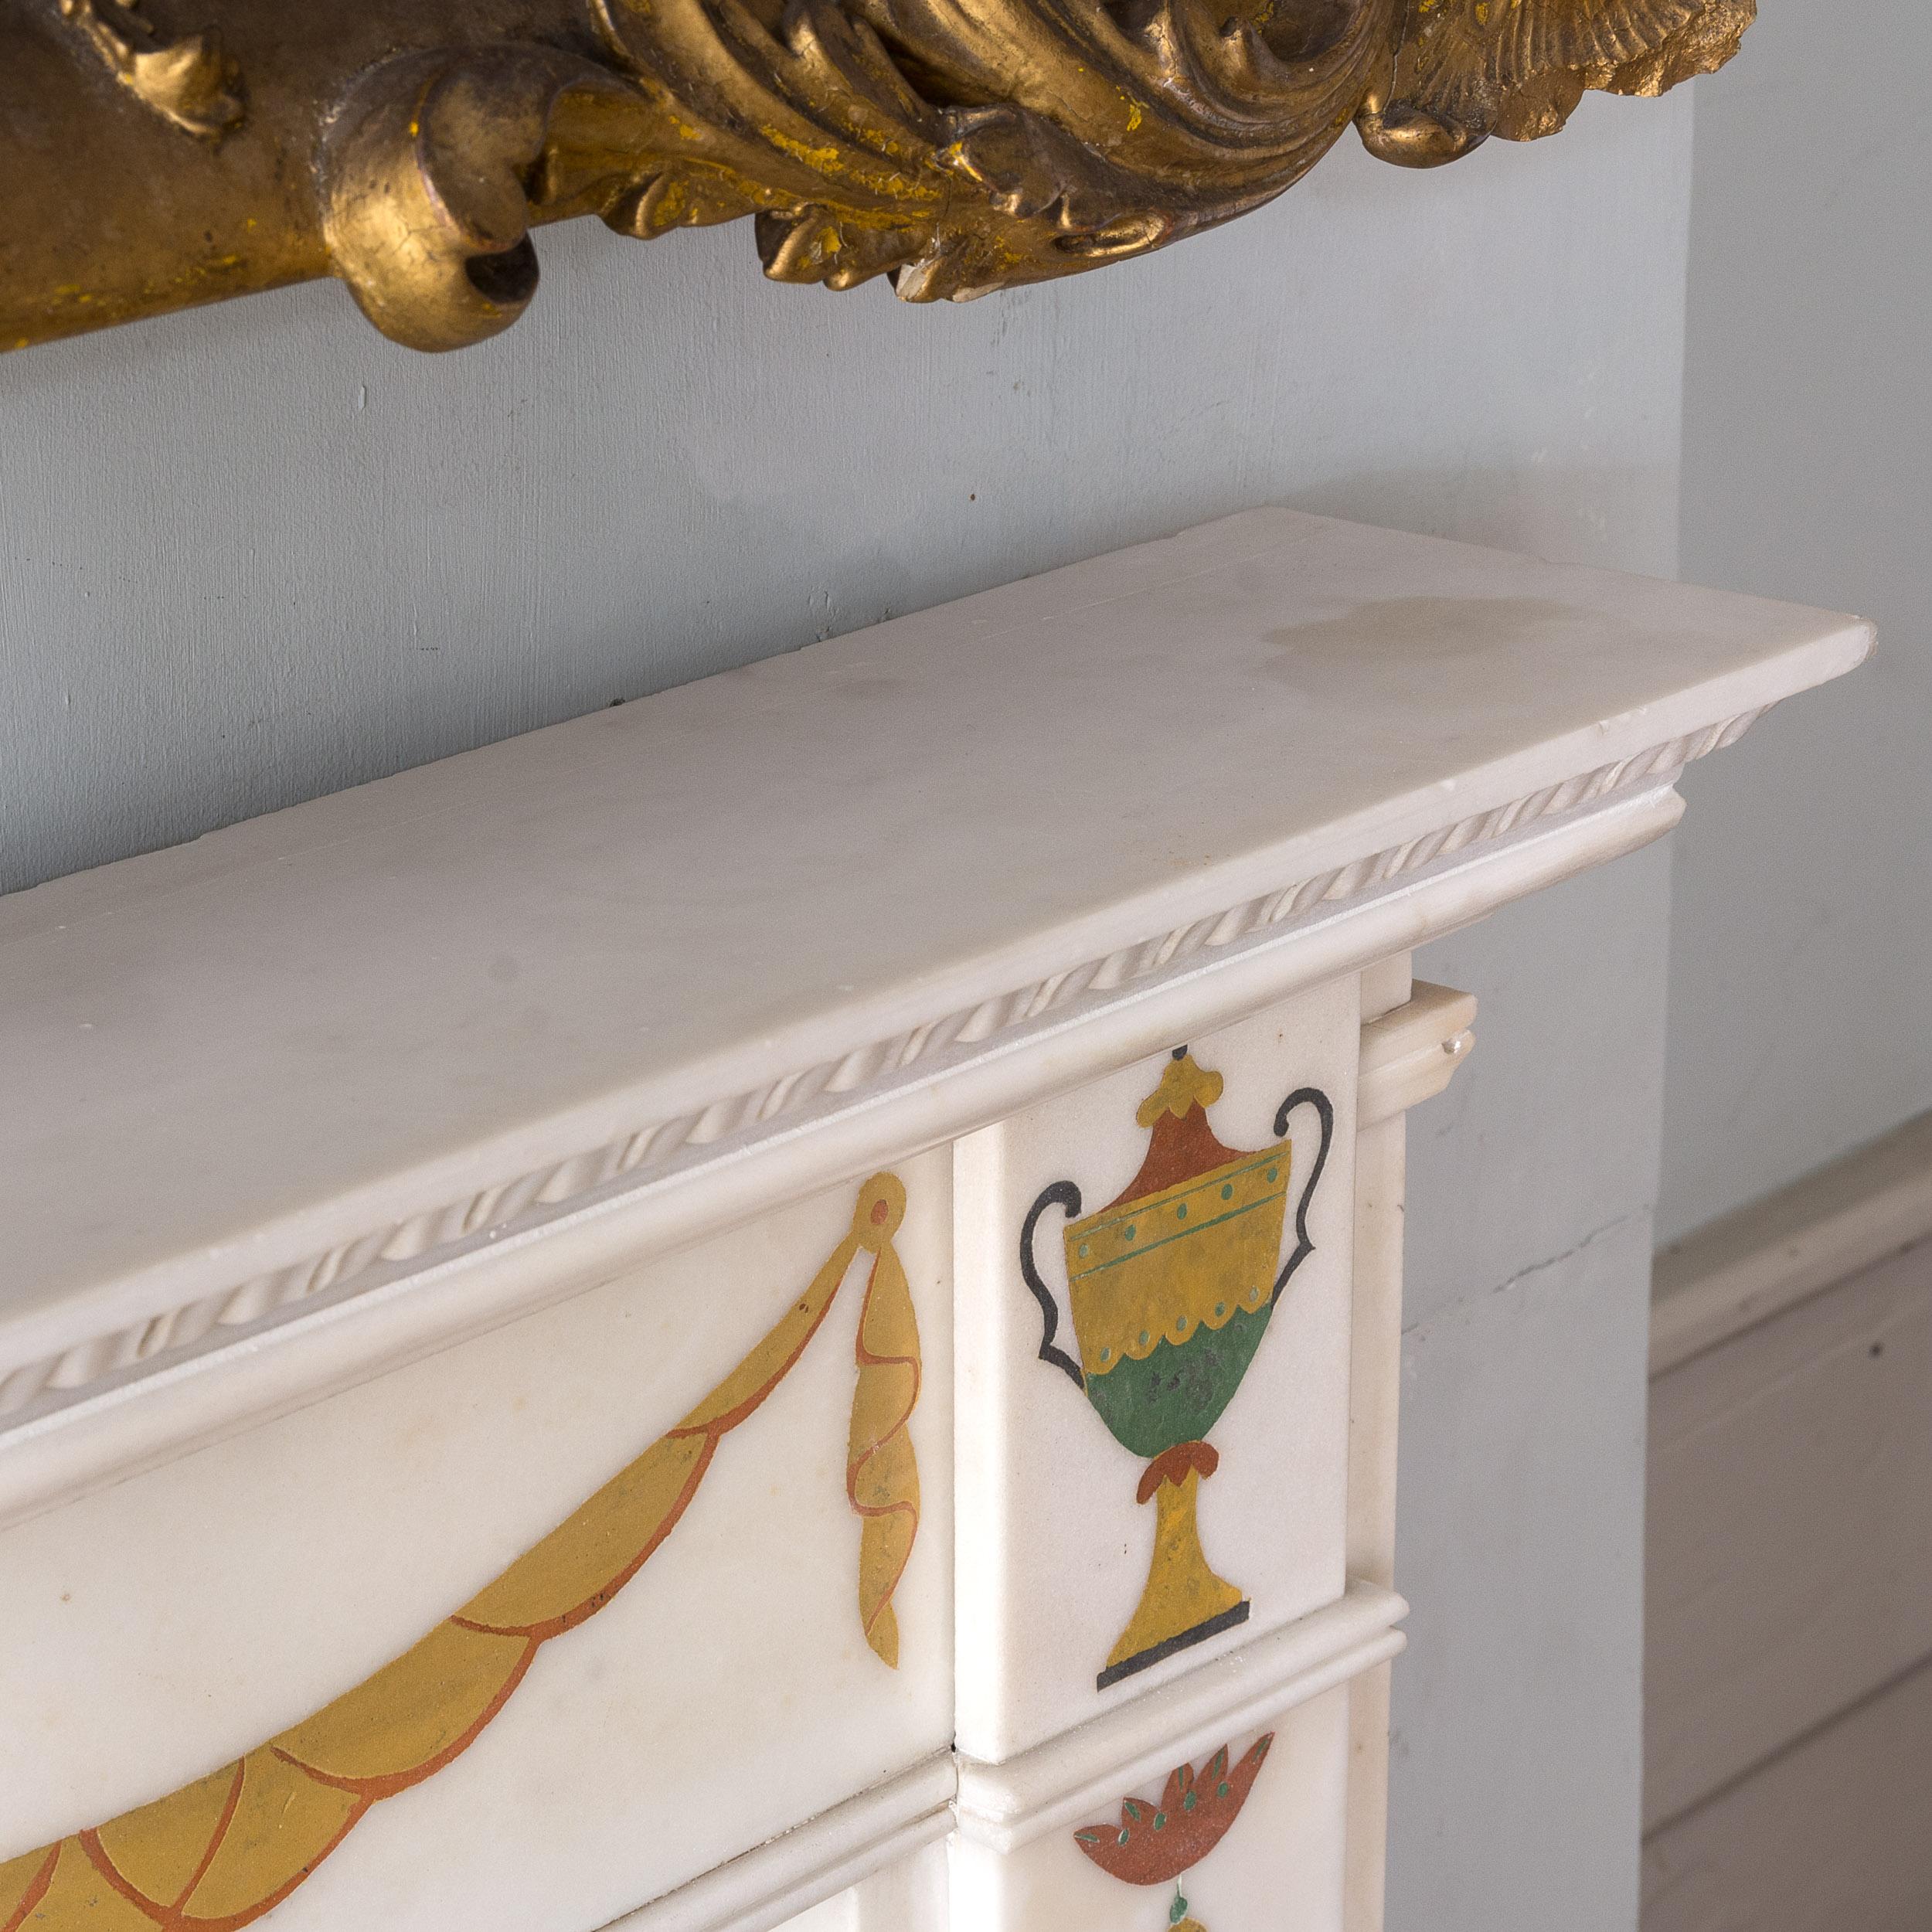 Elegant Early Twentieth Century Statuary Marble Neo-Classical Fire Surround For Sale 4